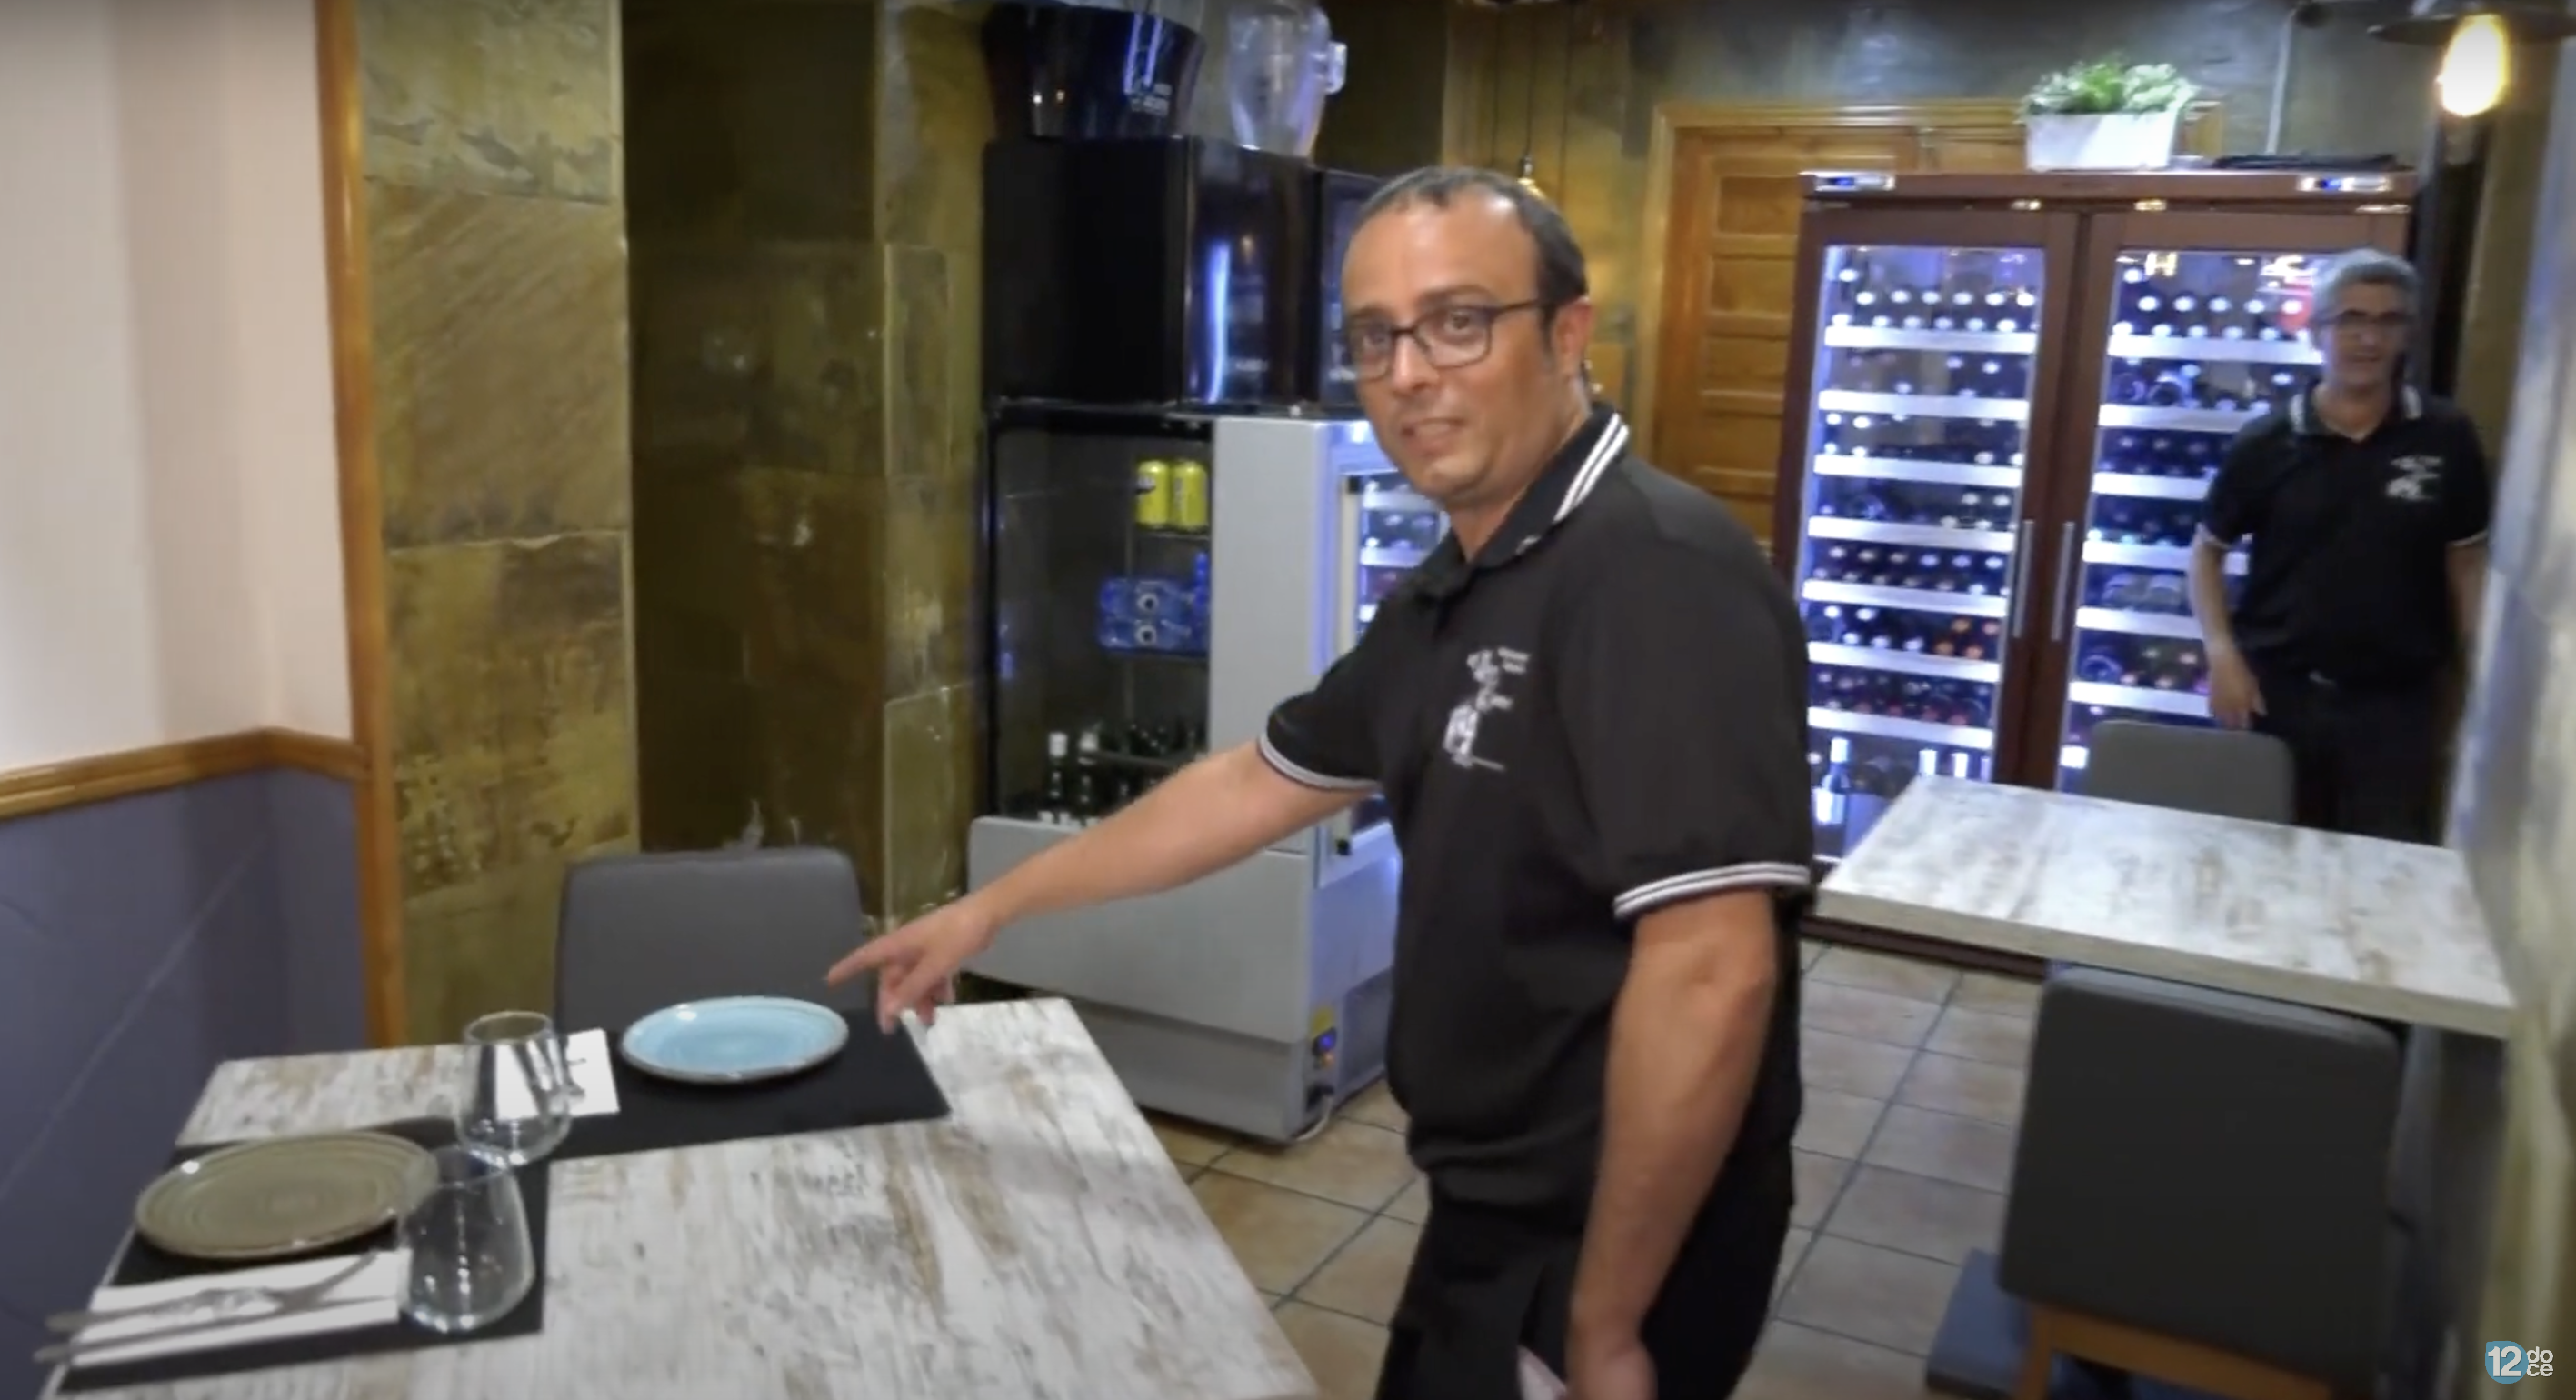 Moisés Doménech, owner of the restaurant El Buen Comer, shows the table where Aidas dined, as seen in a video dated September 21, 2023 | Source: youtube.com/12tv_es